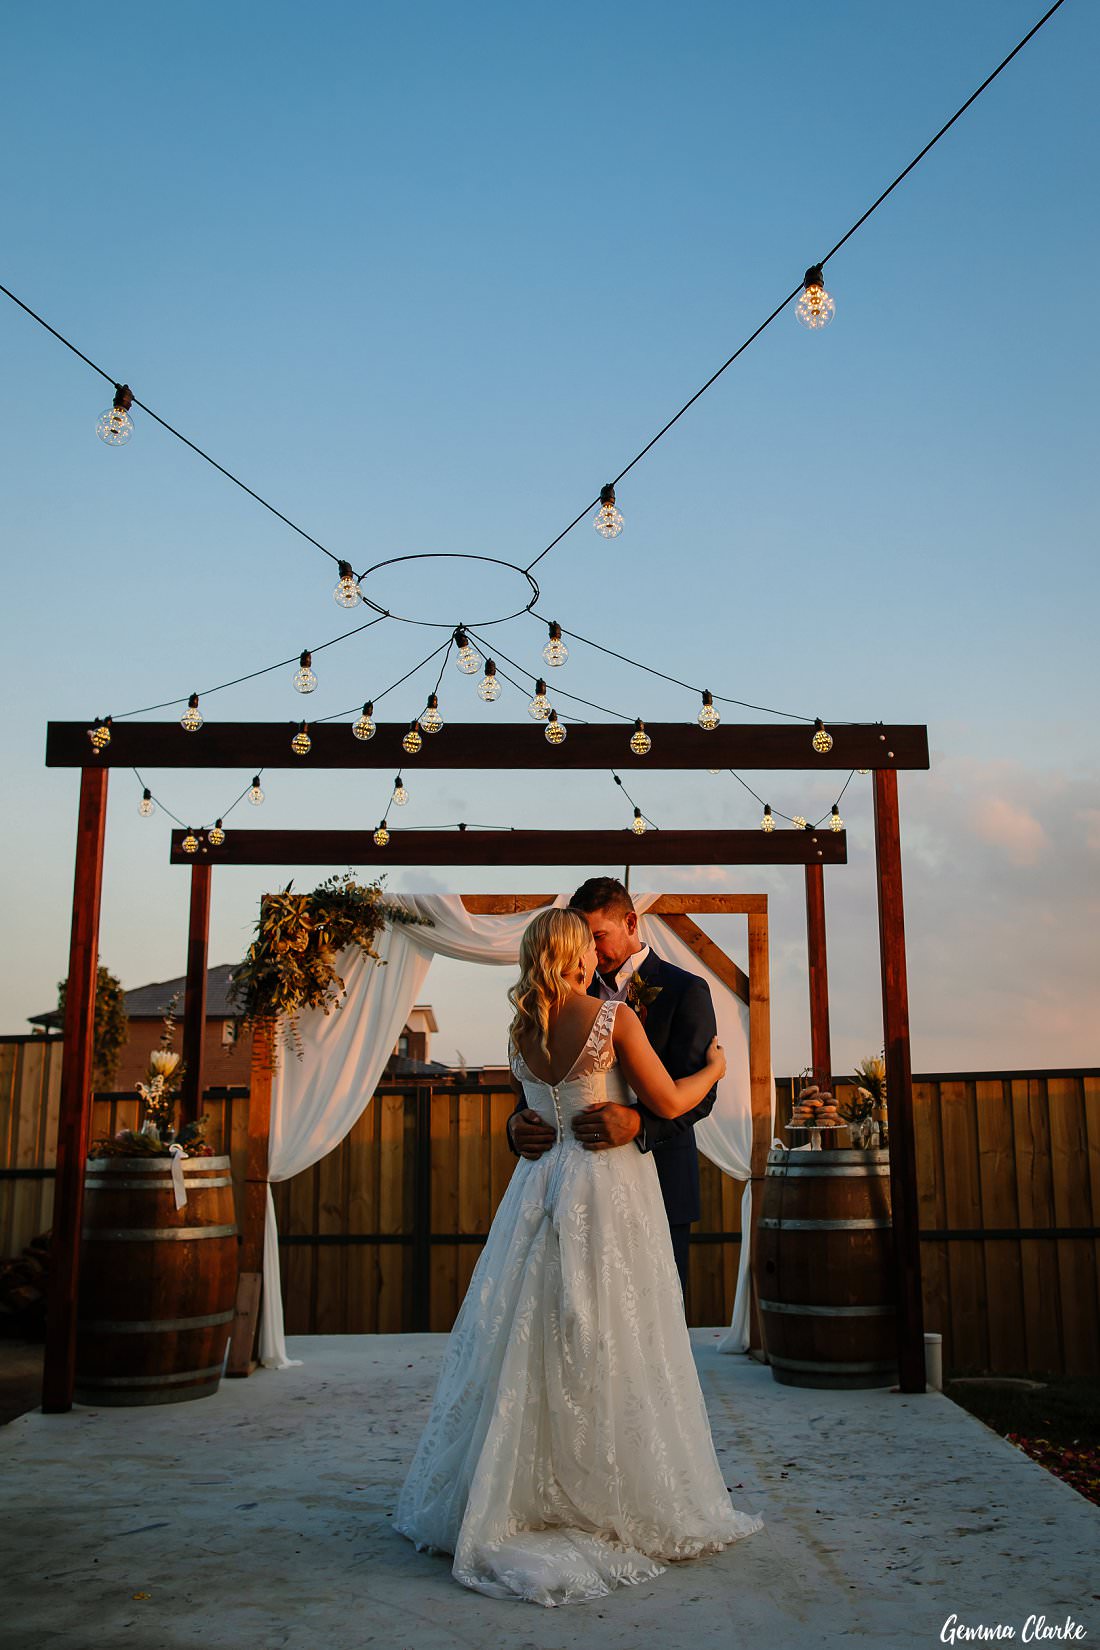 the first dance under their DIY structure and festoon lights at this western sydney backyard wedding